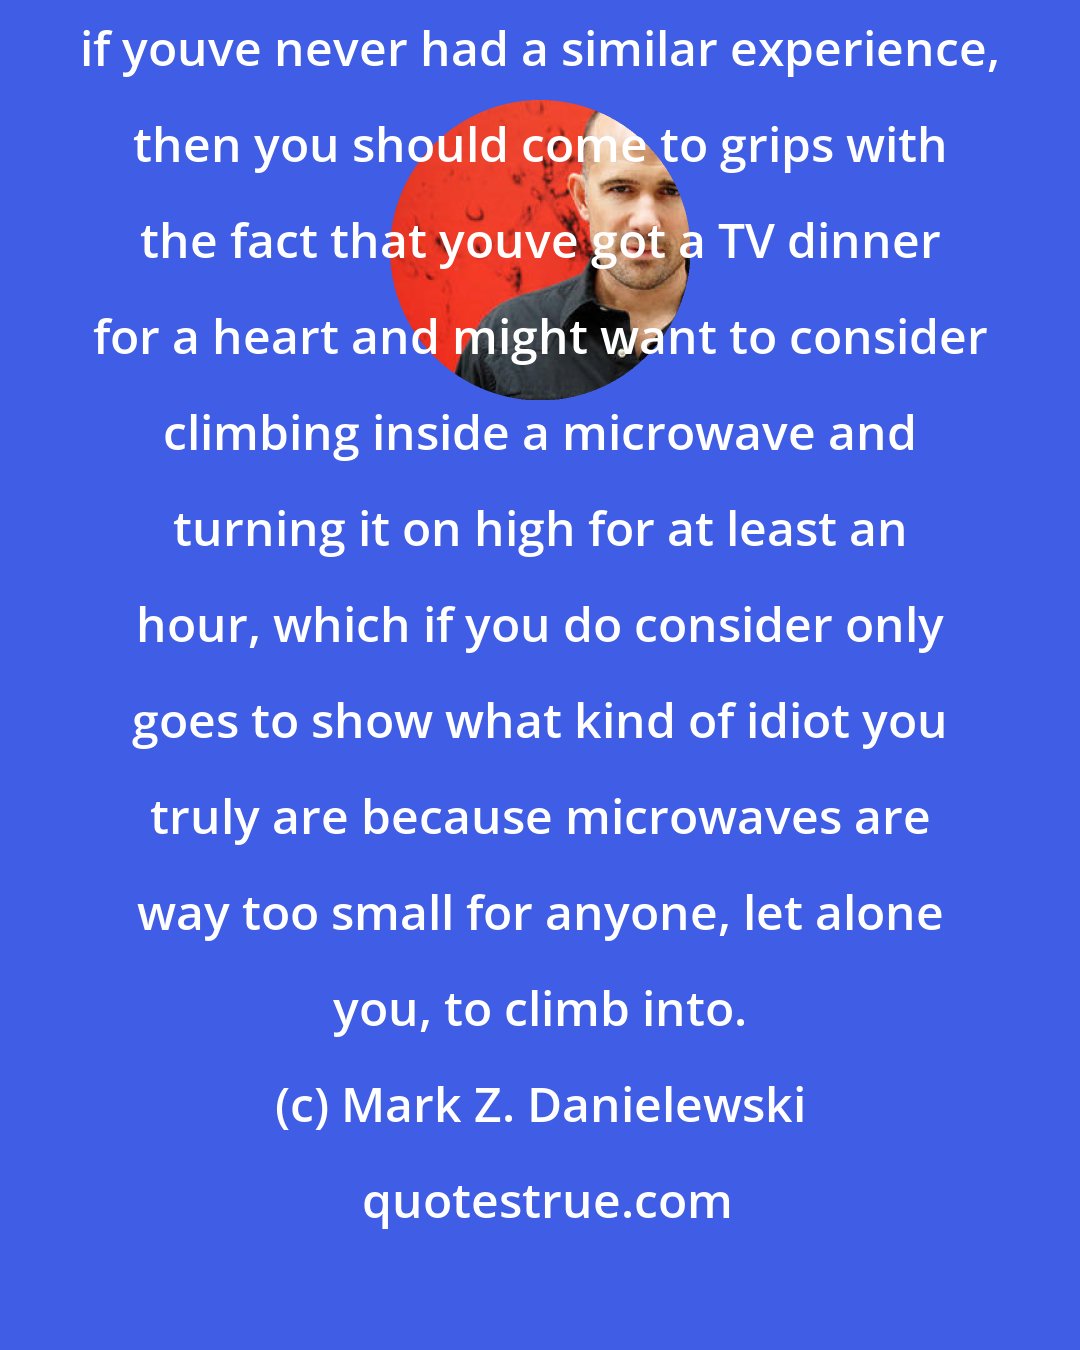 Mark Z. Danielewski: Quick note here: if this crush-slash-swooning stuff is hard for you to stomach, if youve never had a similar experience, then you should come to grips with the fact that youve got a TV dinner for a heart and might want to consider climbing inside a microwave and turning it on high for at least an hour, which if you do consider only goes to show what kind of idiot you truly are because microwaves are way too small for anyone, let alone you, to climb into.